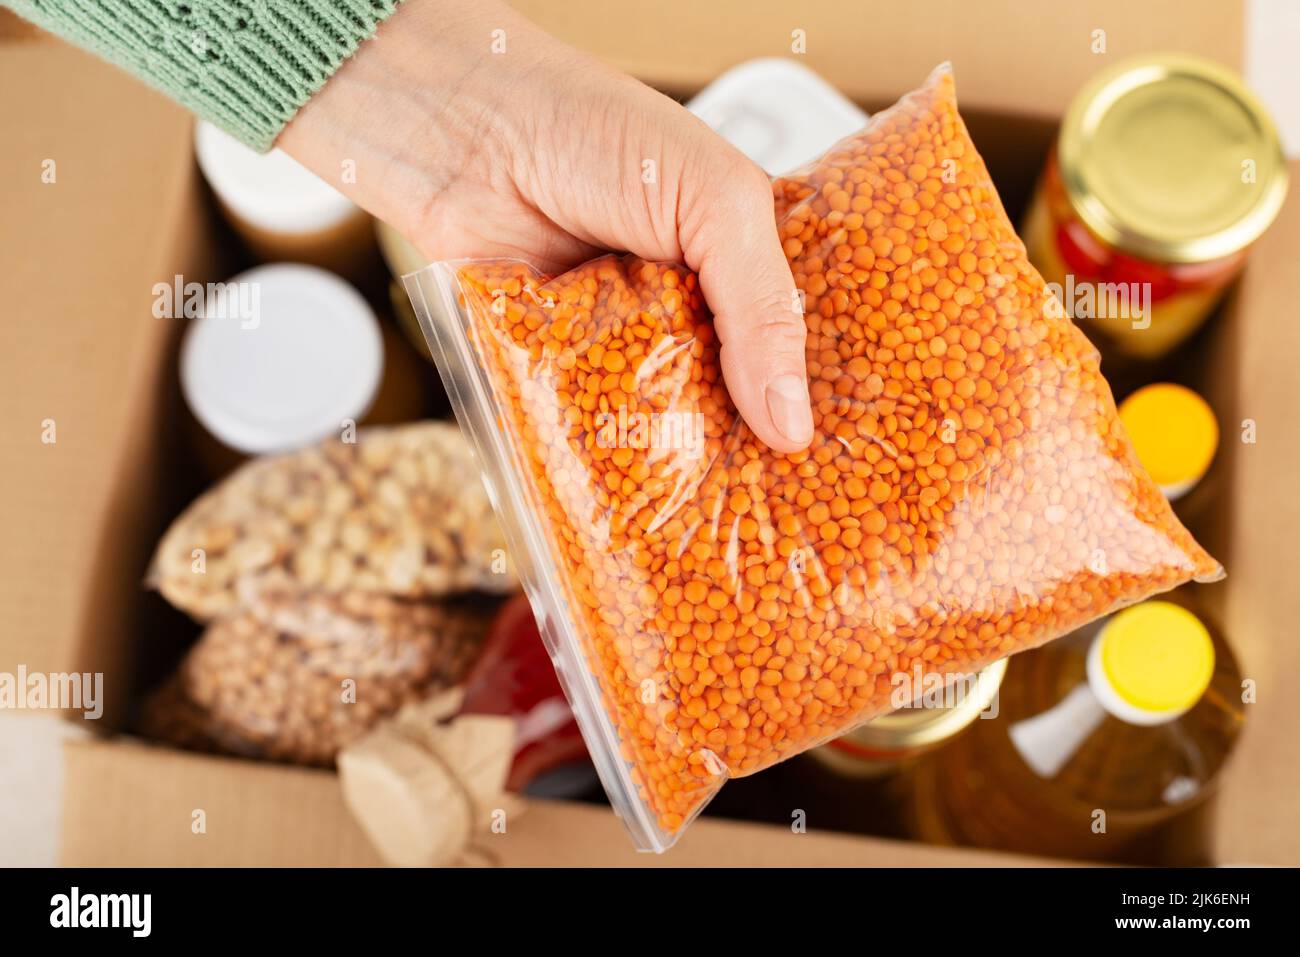 Plastic container with lentils in female hand on emergency food box background Stock Photo